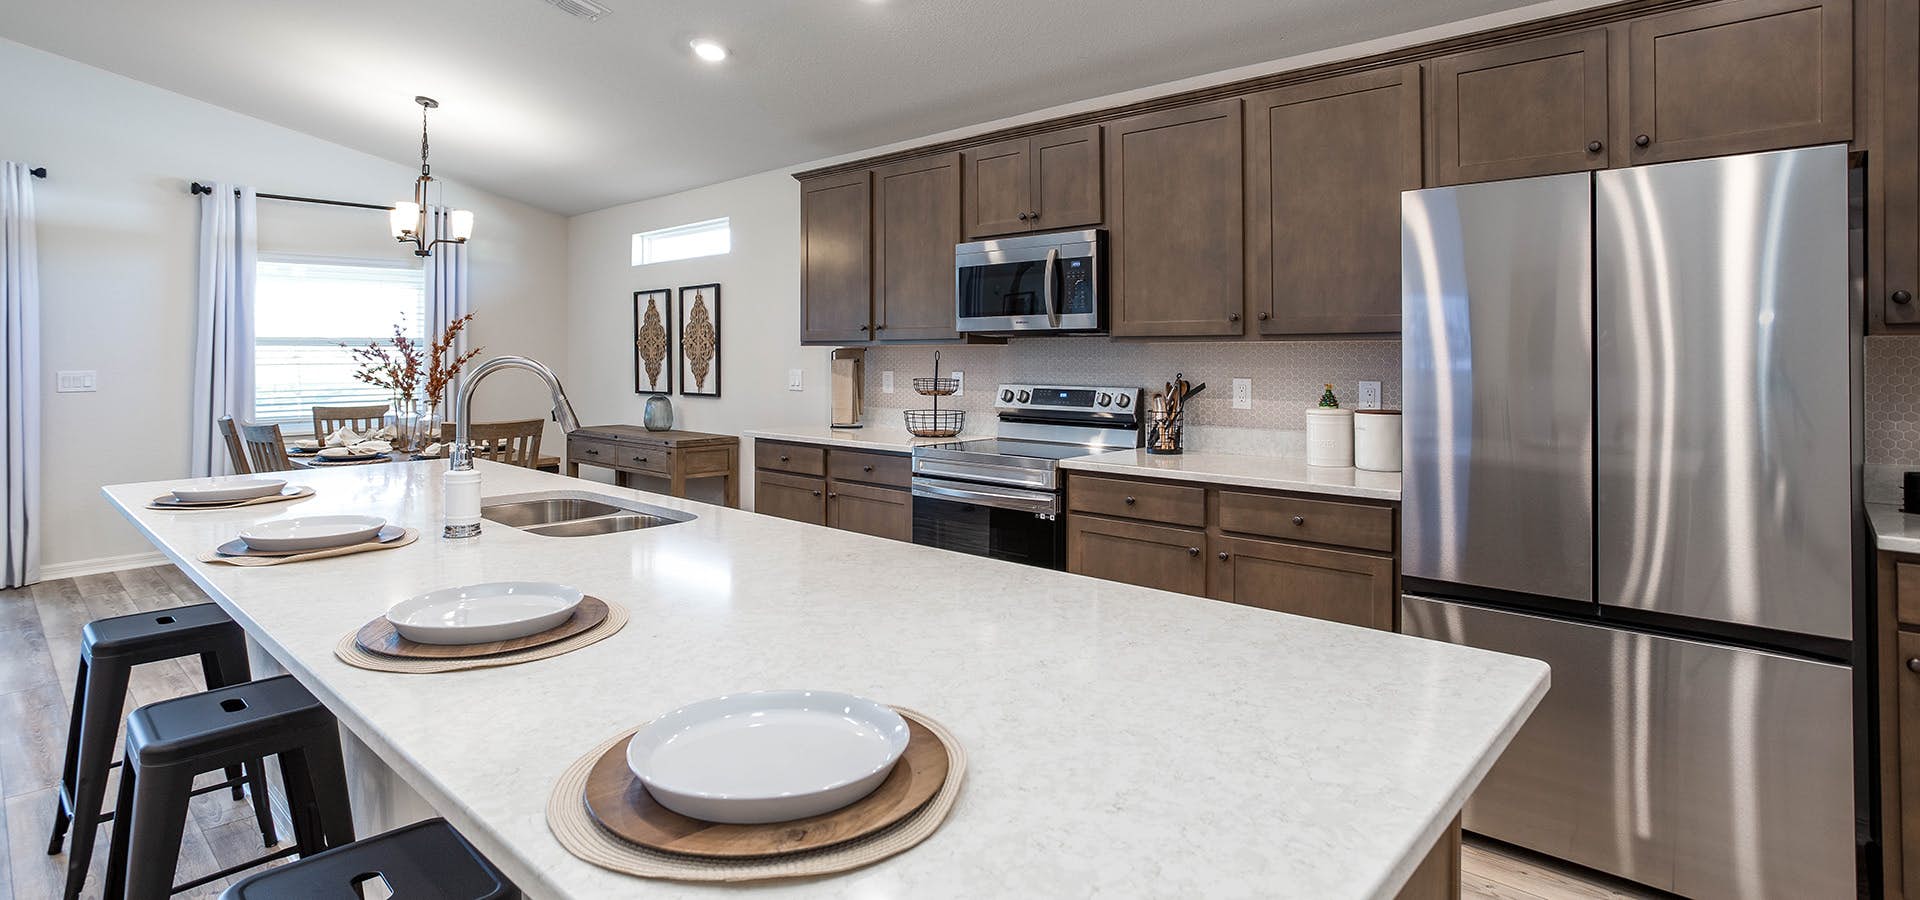 Kitchen with large island and quartz countertops